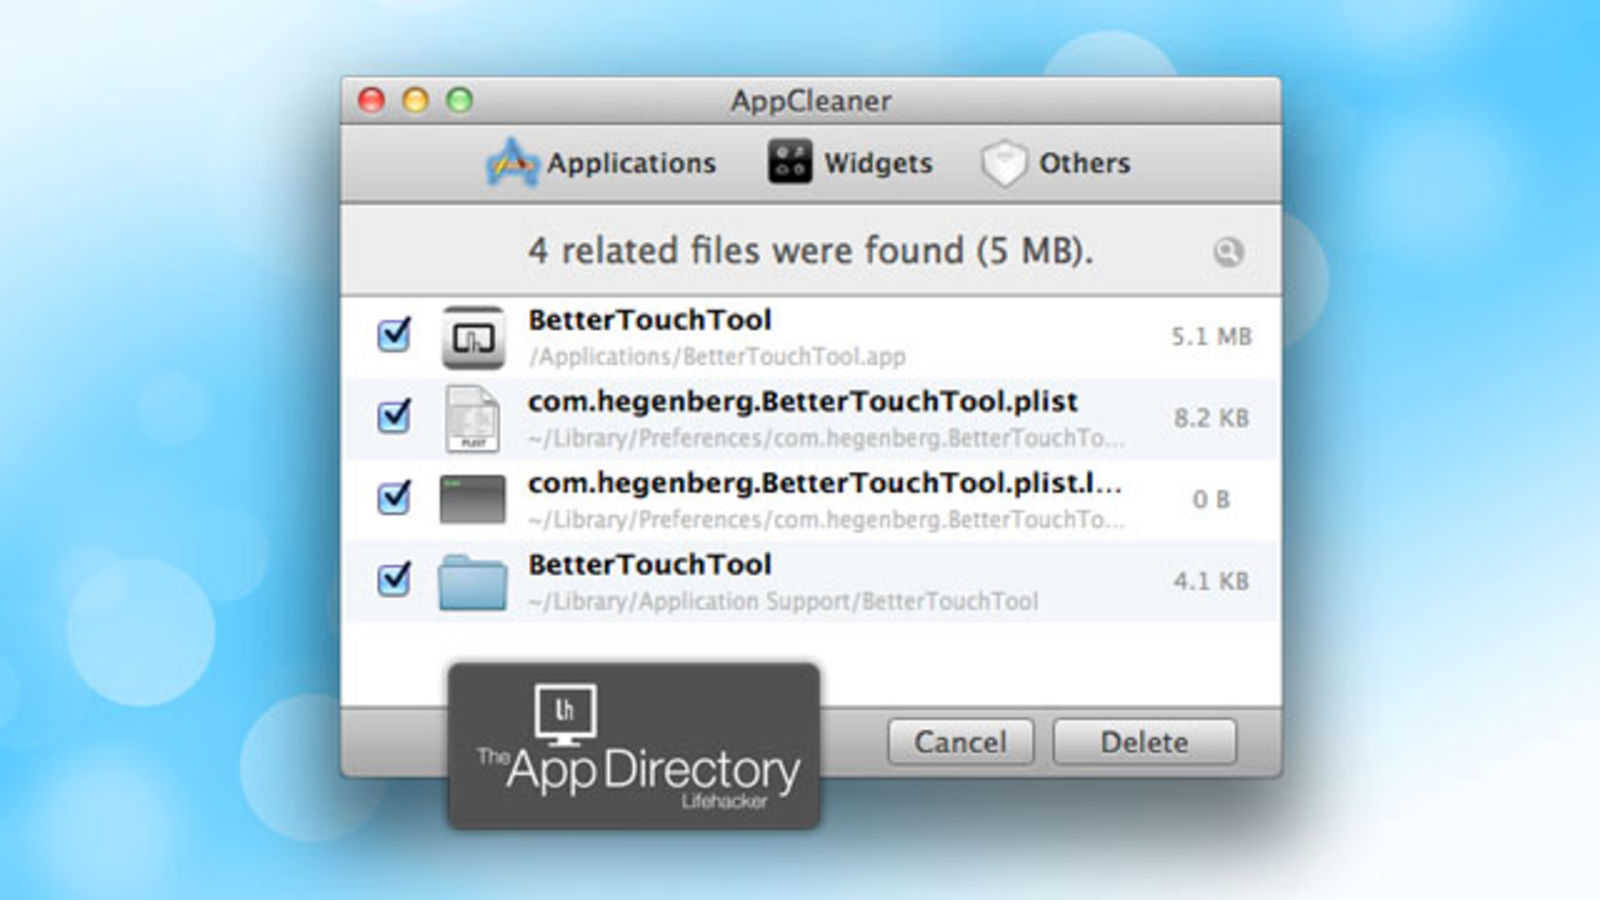 Which Tool Can Be Used To Search For Both Files And Applications On A Mac